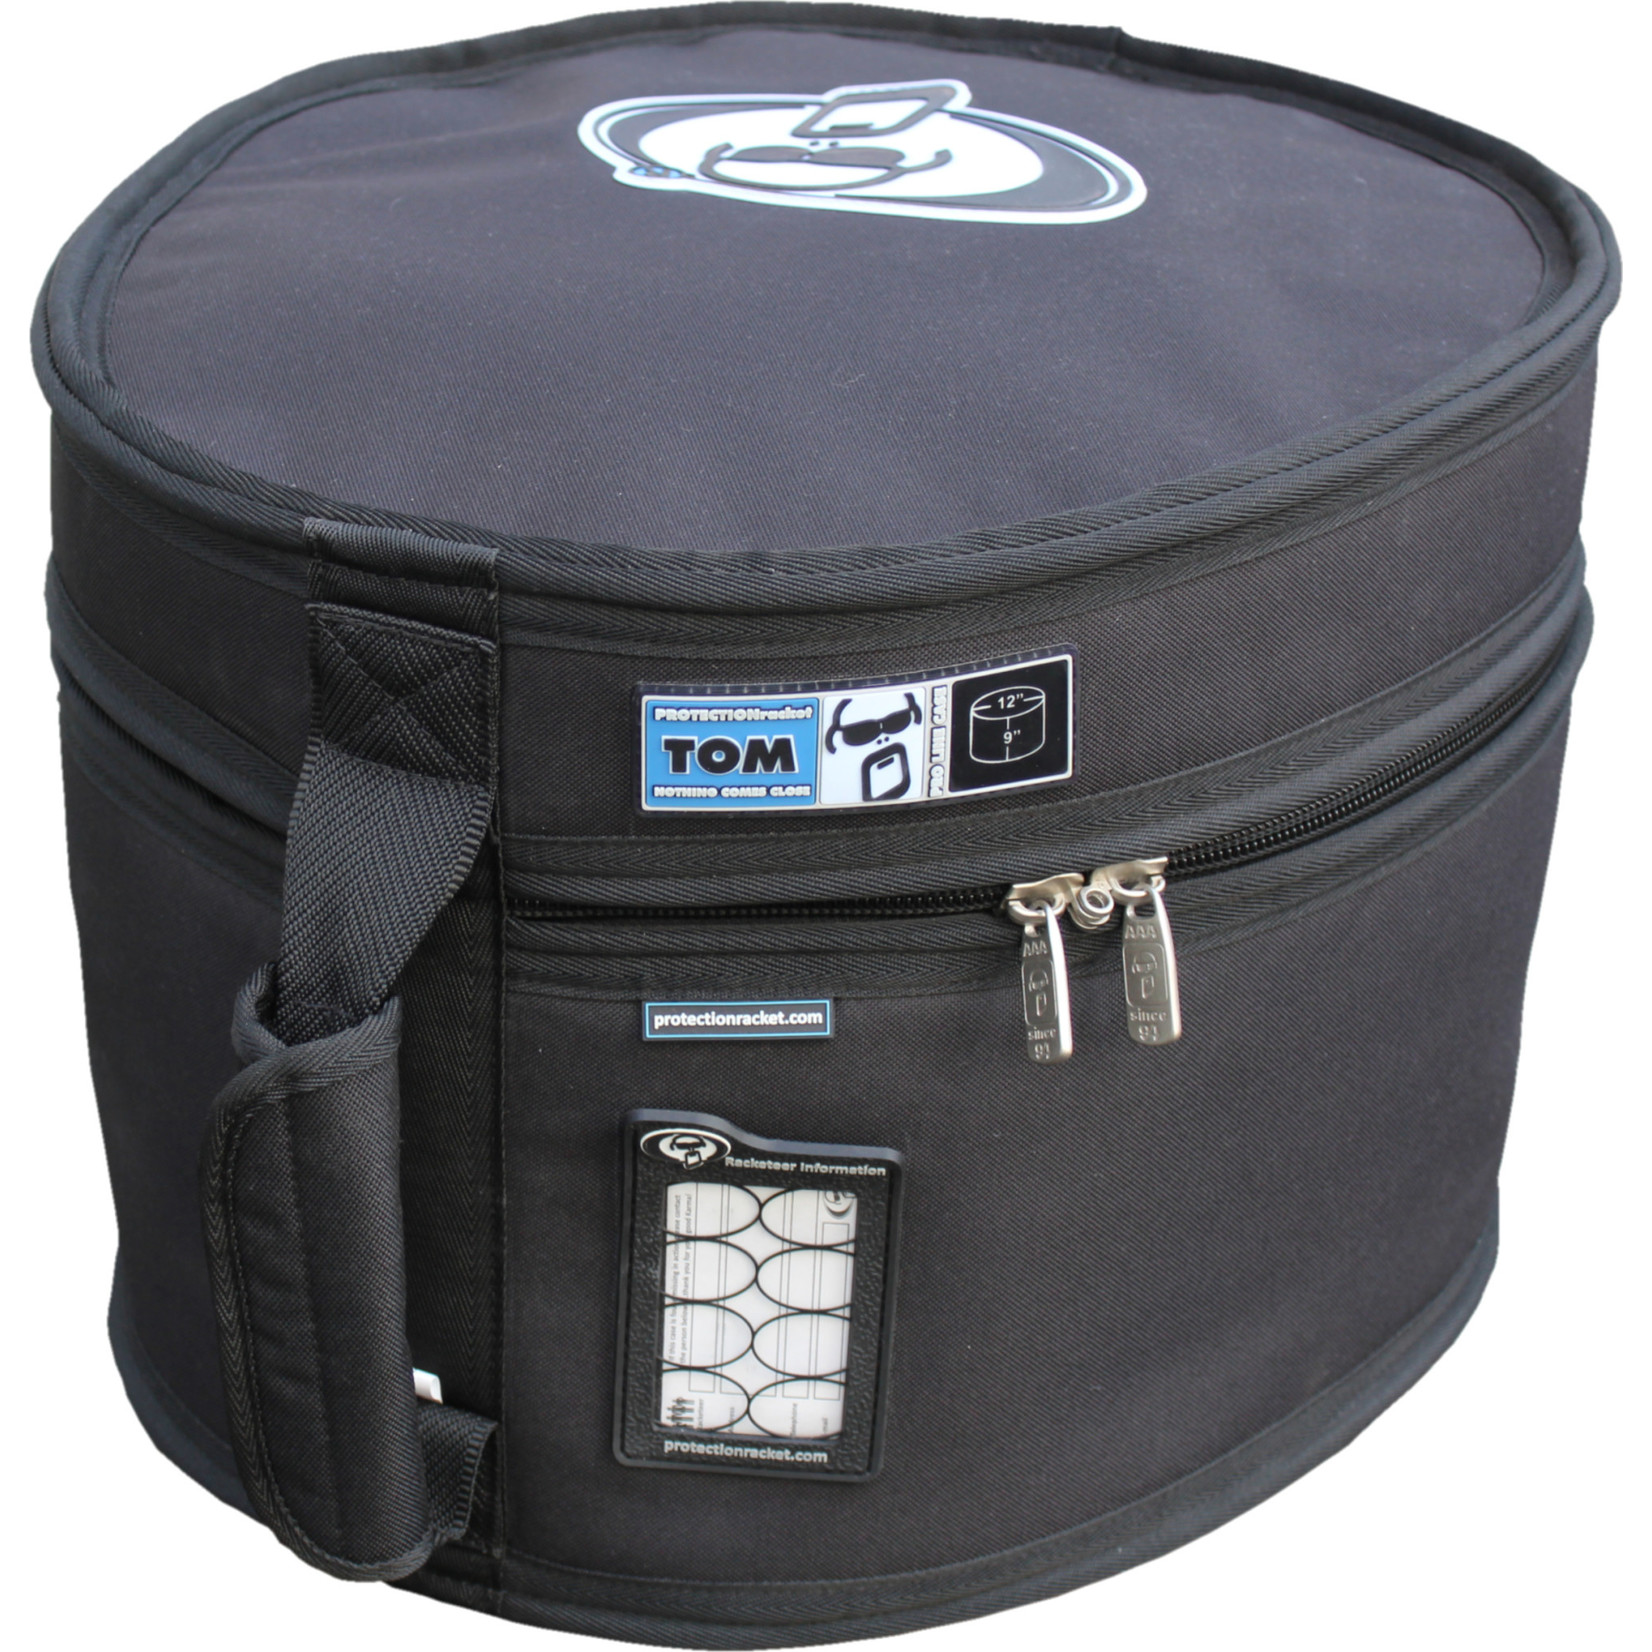 PROTECTION RACKET 8X10 EGG SHAPED TOM BAG 5010-10 - 2112 PERCUSSION